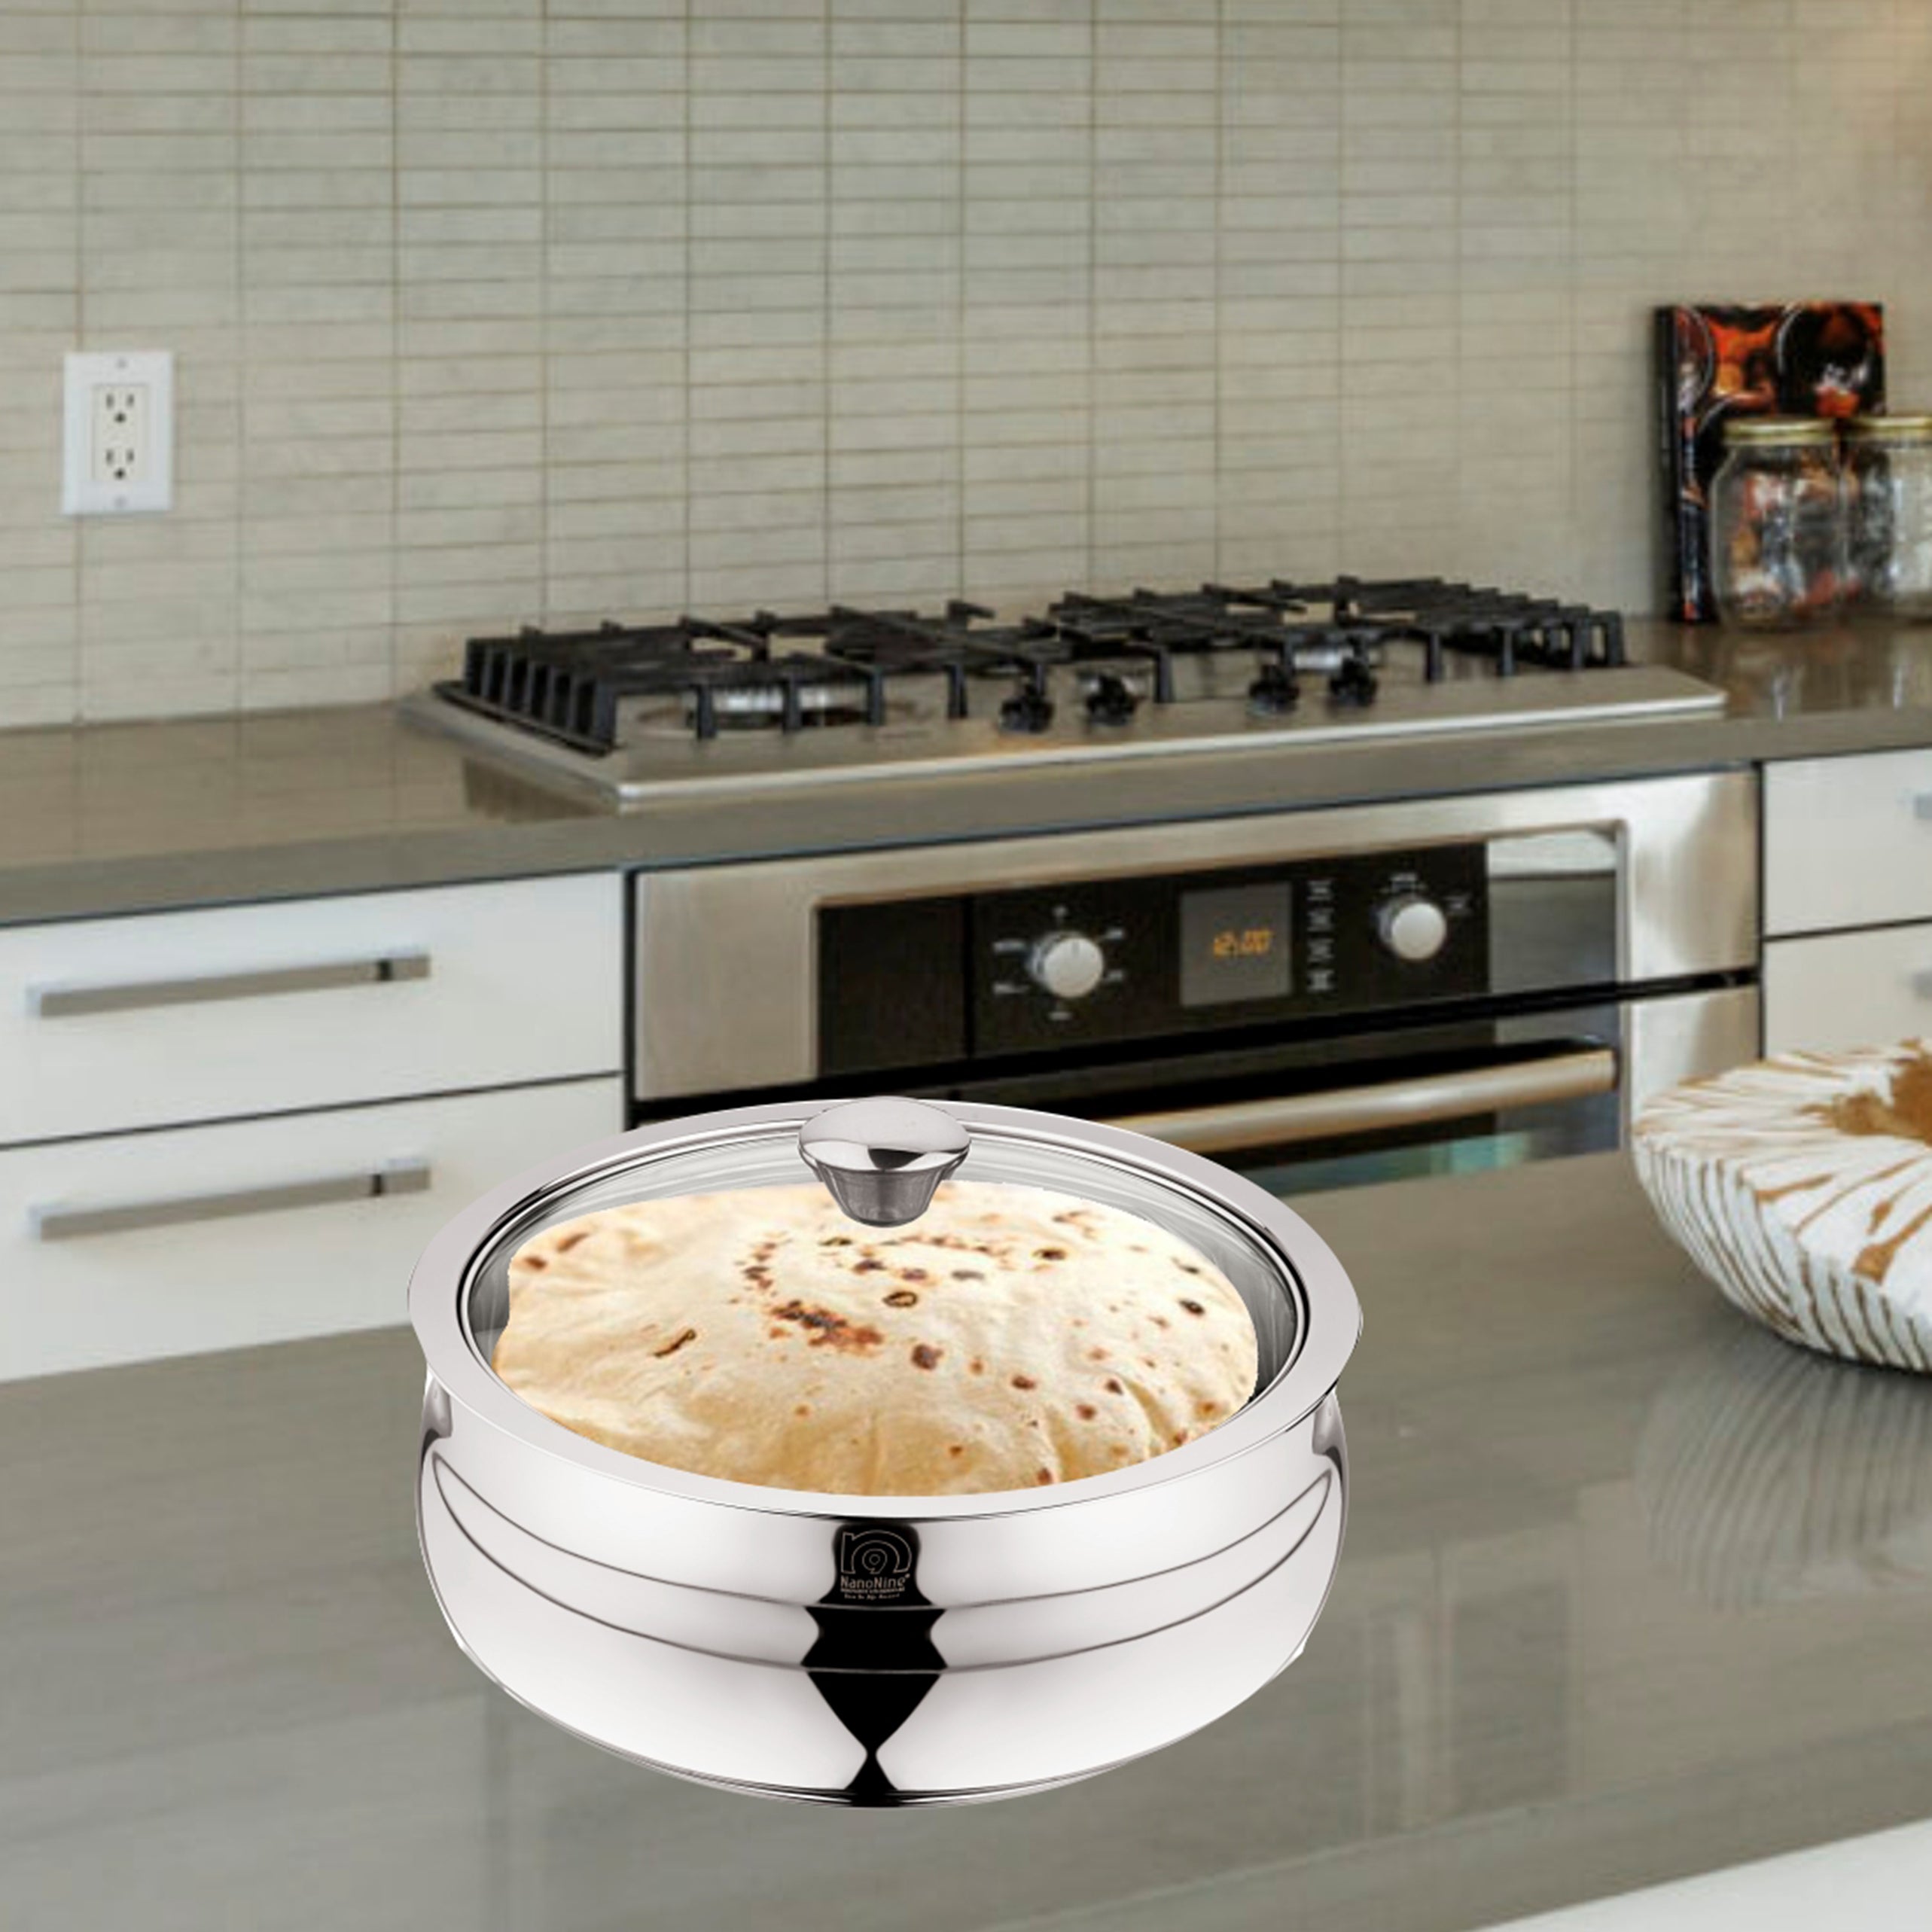 NanoNine Chapati Server Belly 2.65 L Double Wall Insulated Stainless Steel Serve Fresh Casserole with Steel Coaster and Glass Lid.